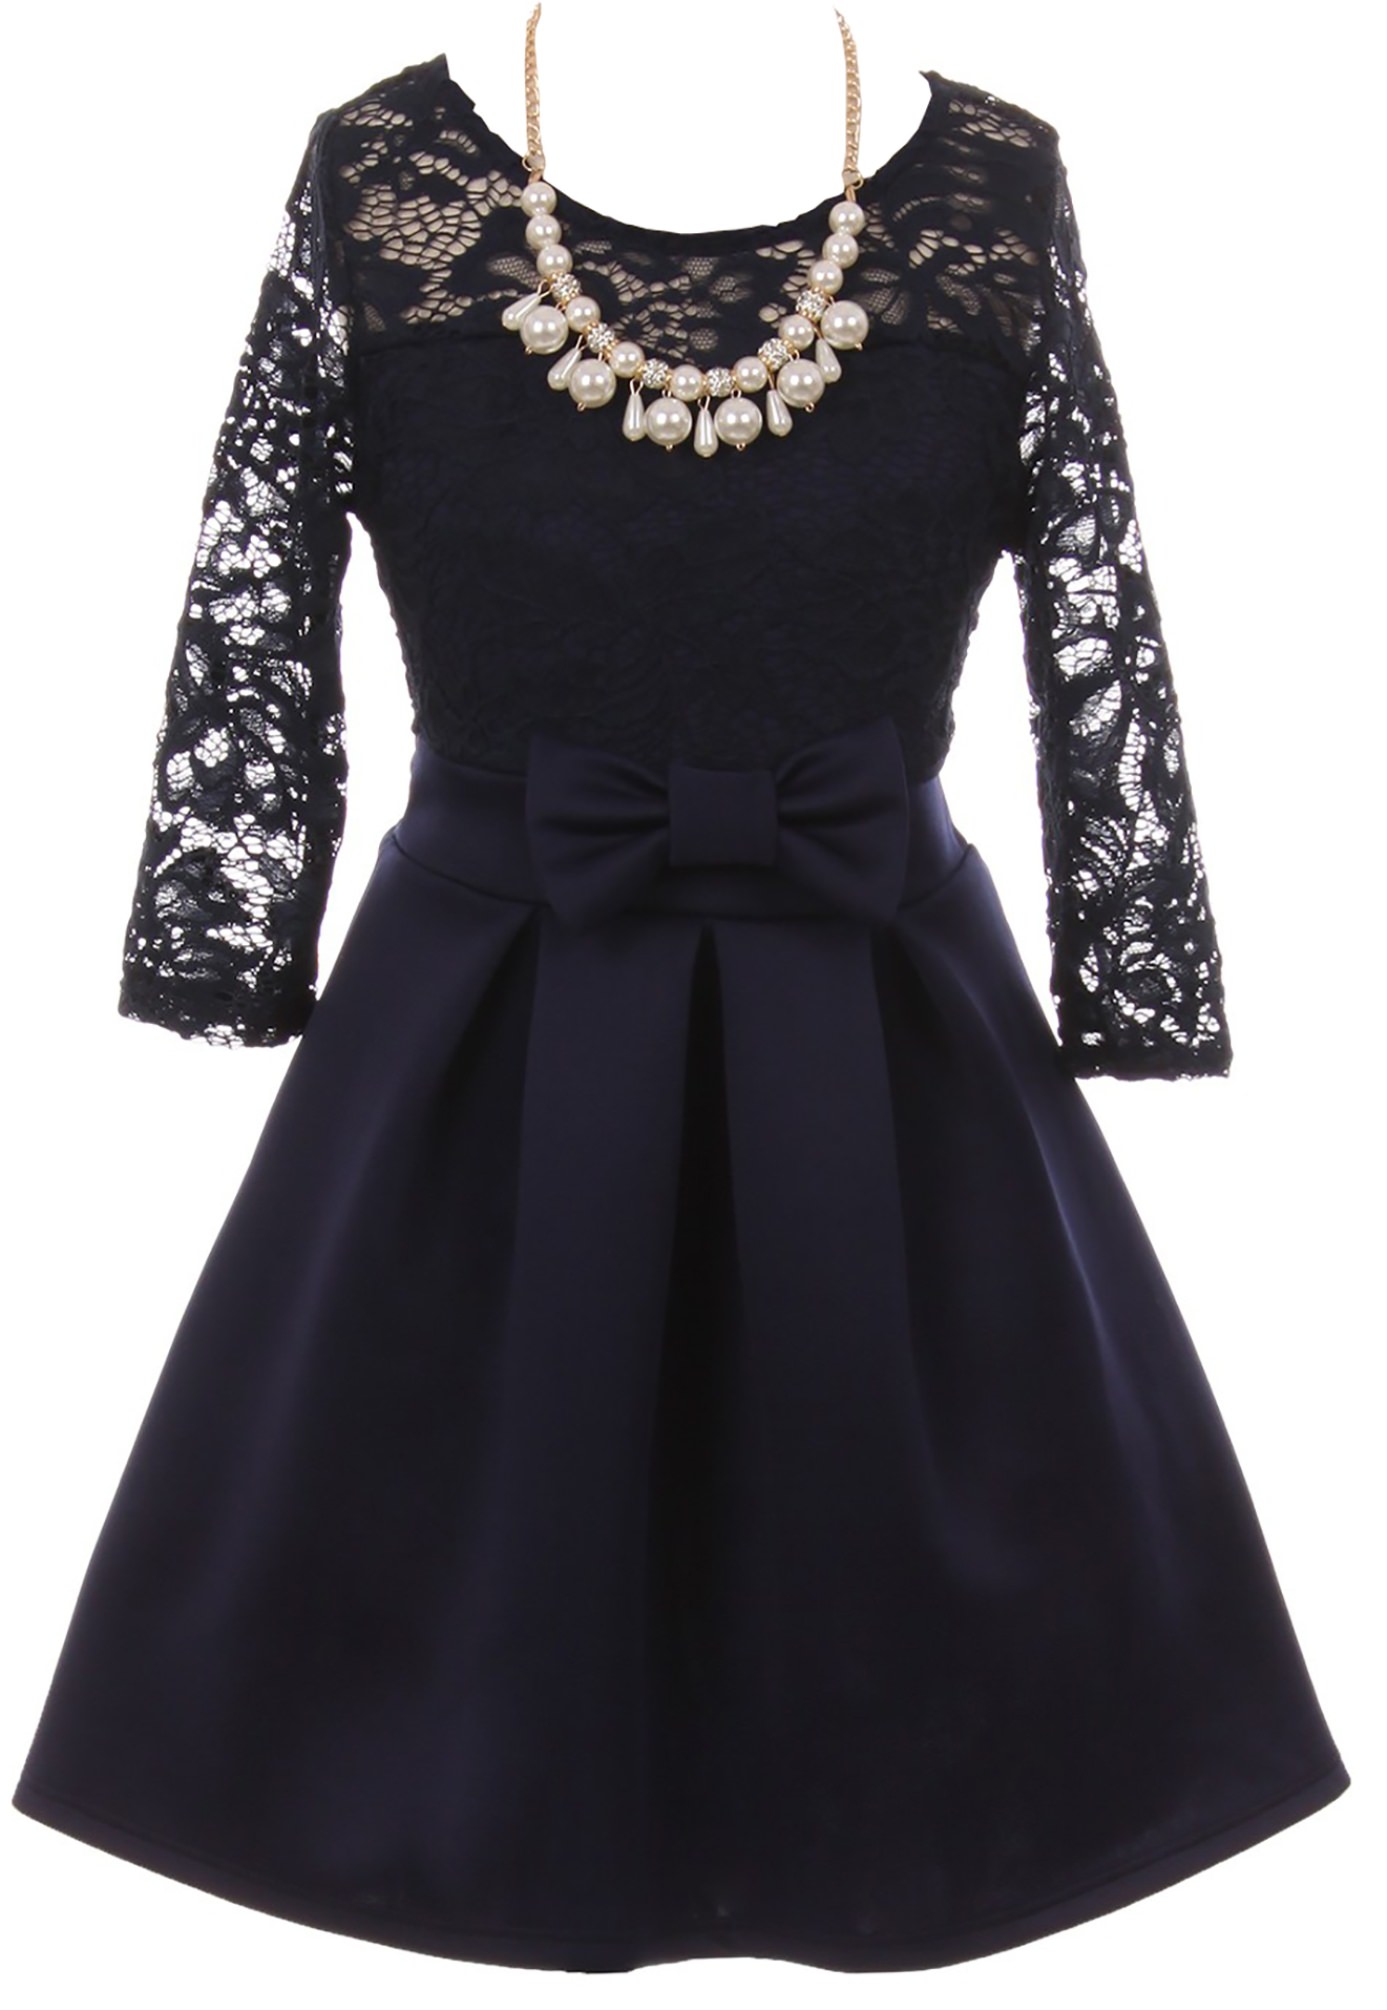 Little Girls Elegant Floral Lace Illusion Top Pearl Necklace Holiday Flower Girl Dress Navy Blue 6 (2J1K0S4) - image 1 of 4